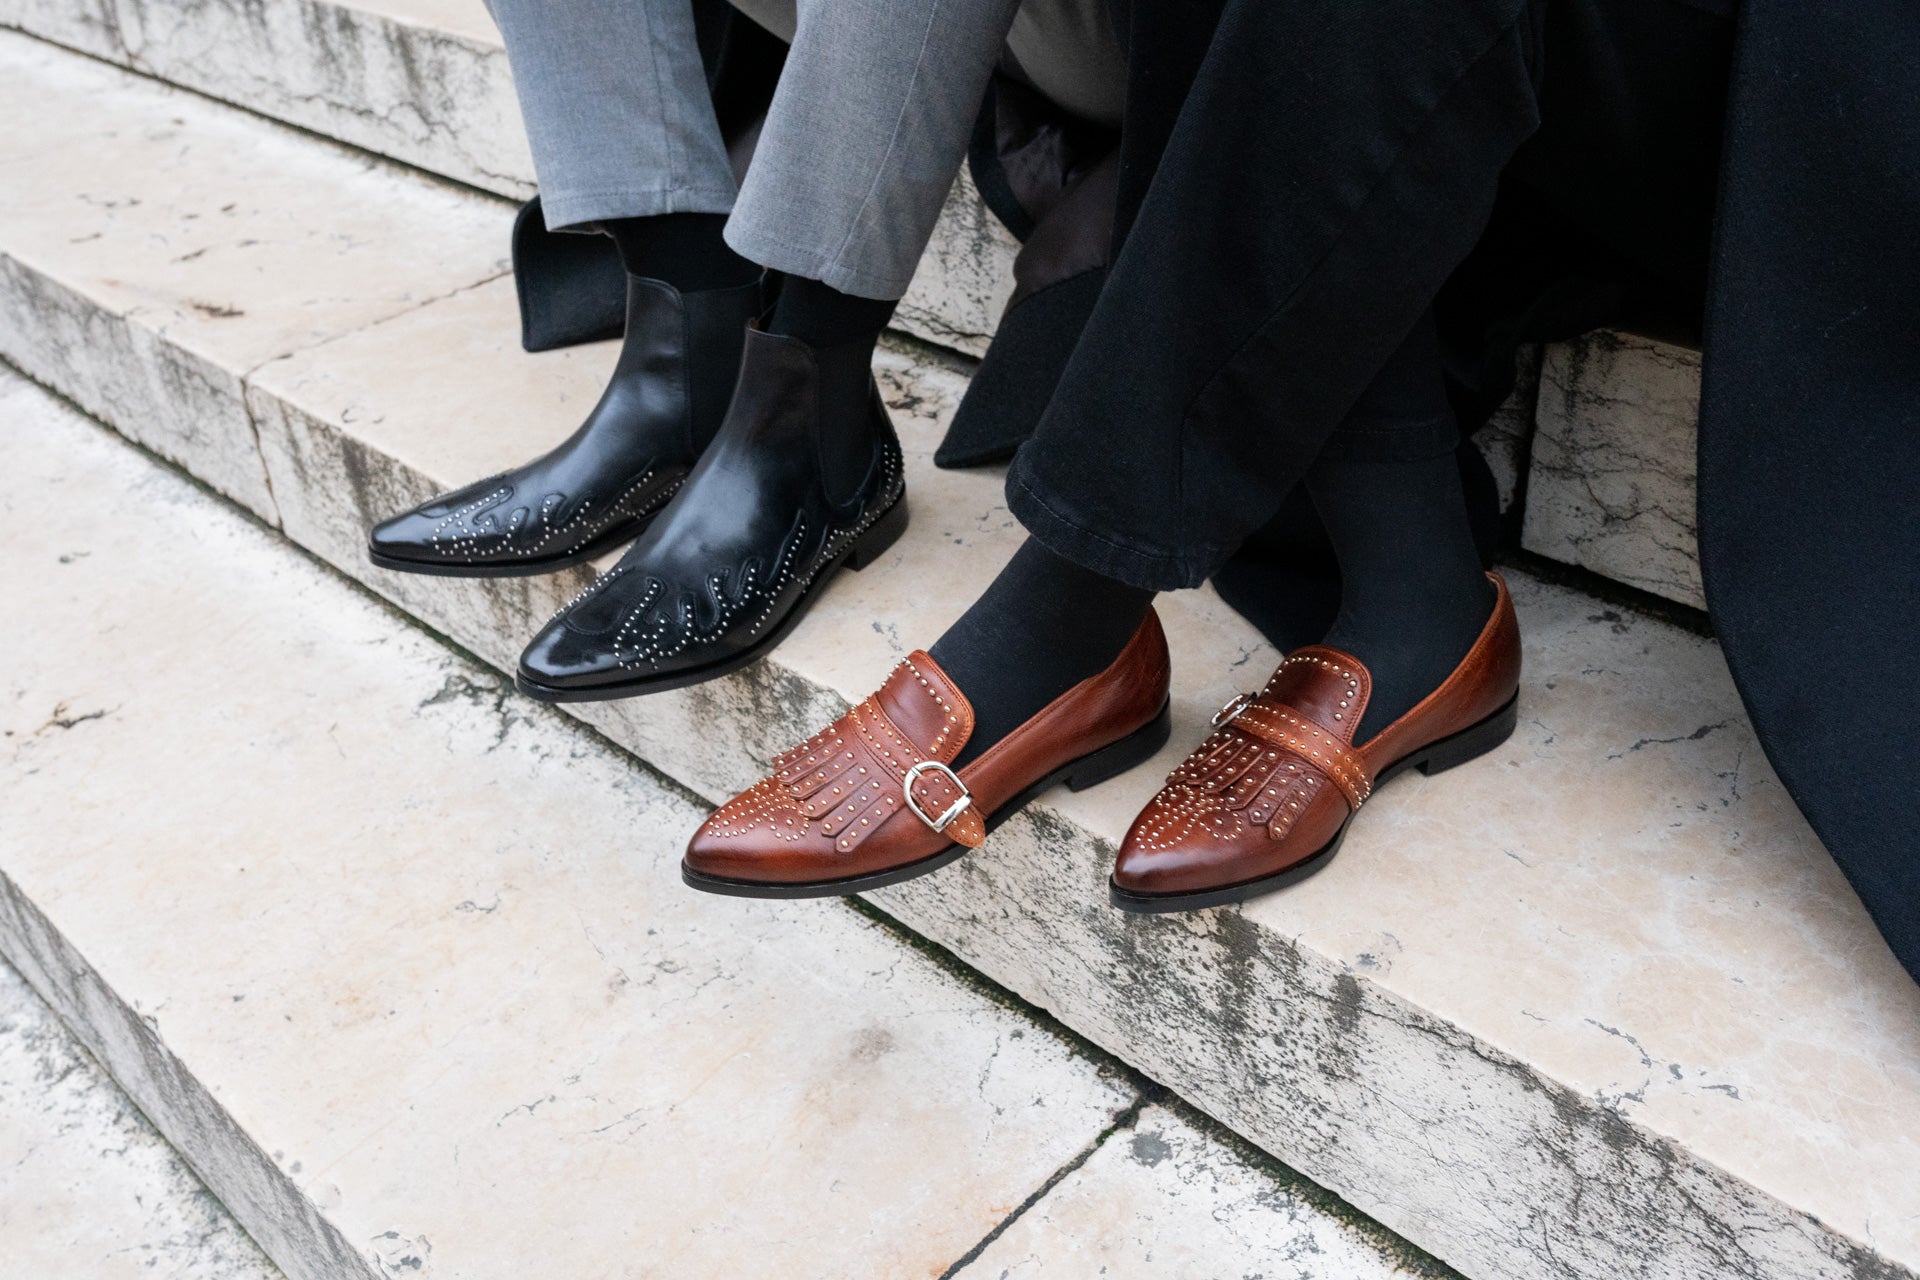 Leather shoes with metallic details - Melvin & Hamilton